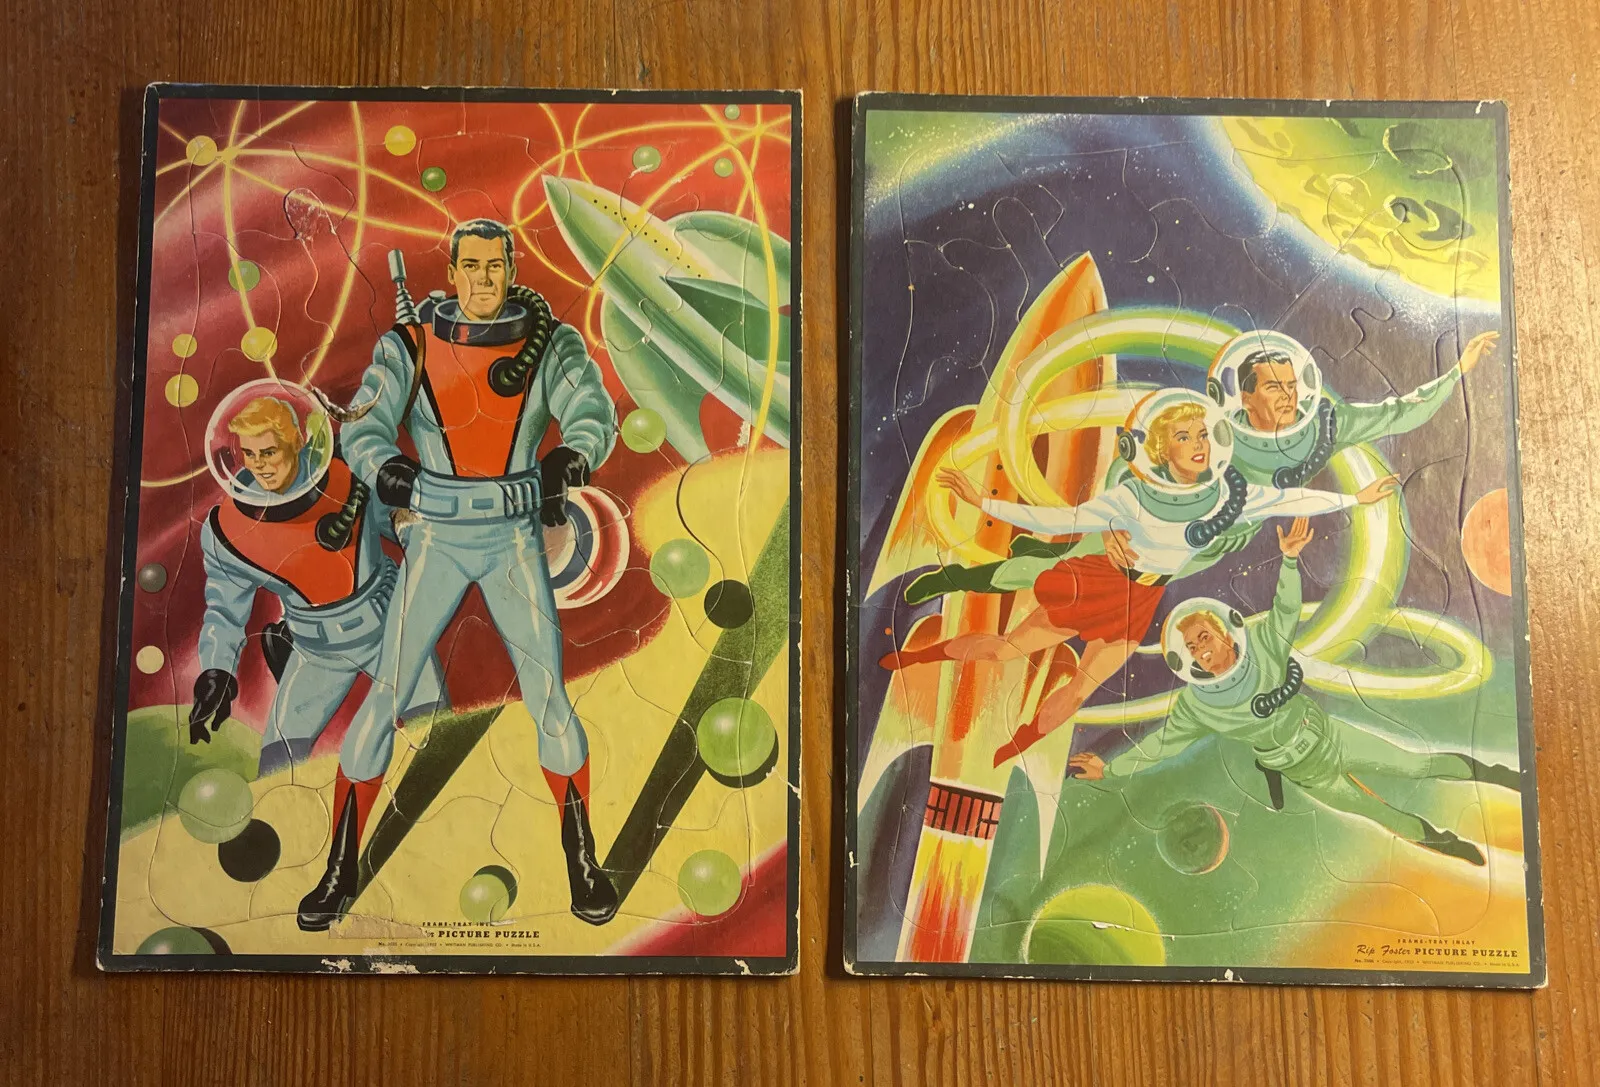 2 Rip Foster Science Fiction Picture Puzzles No 2606 Whitman Publishing Co 1953